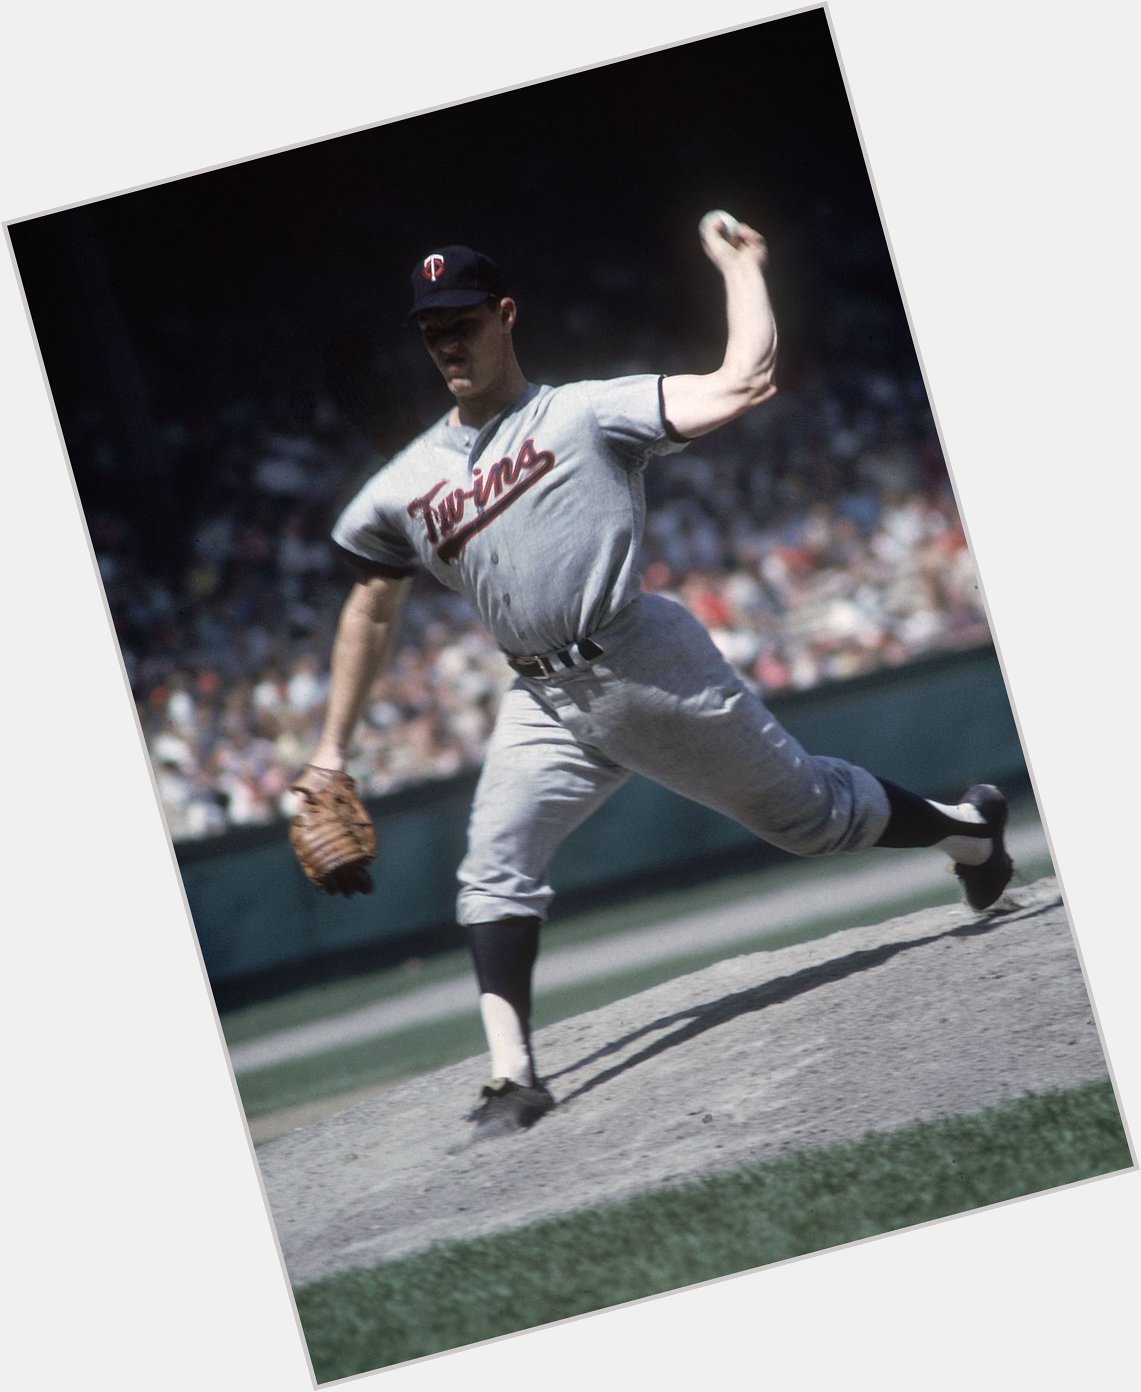 Happy Birthday to legend Jim Kaat.   

REmessage if you think he should be in the  